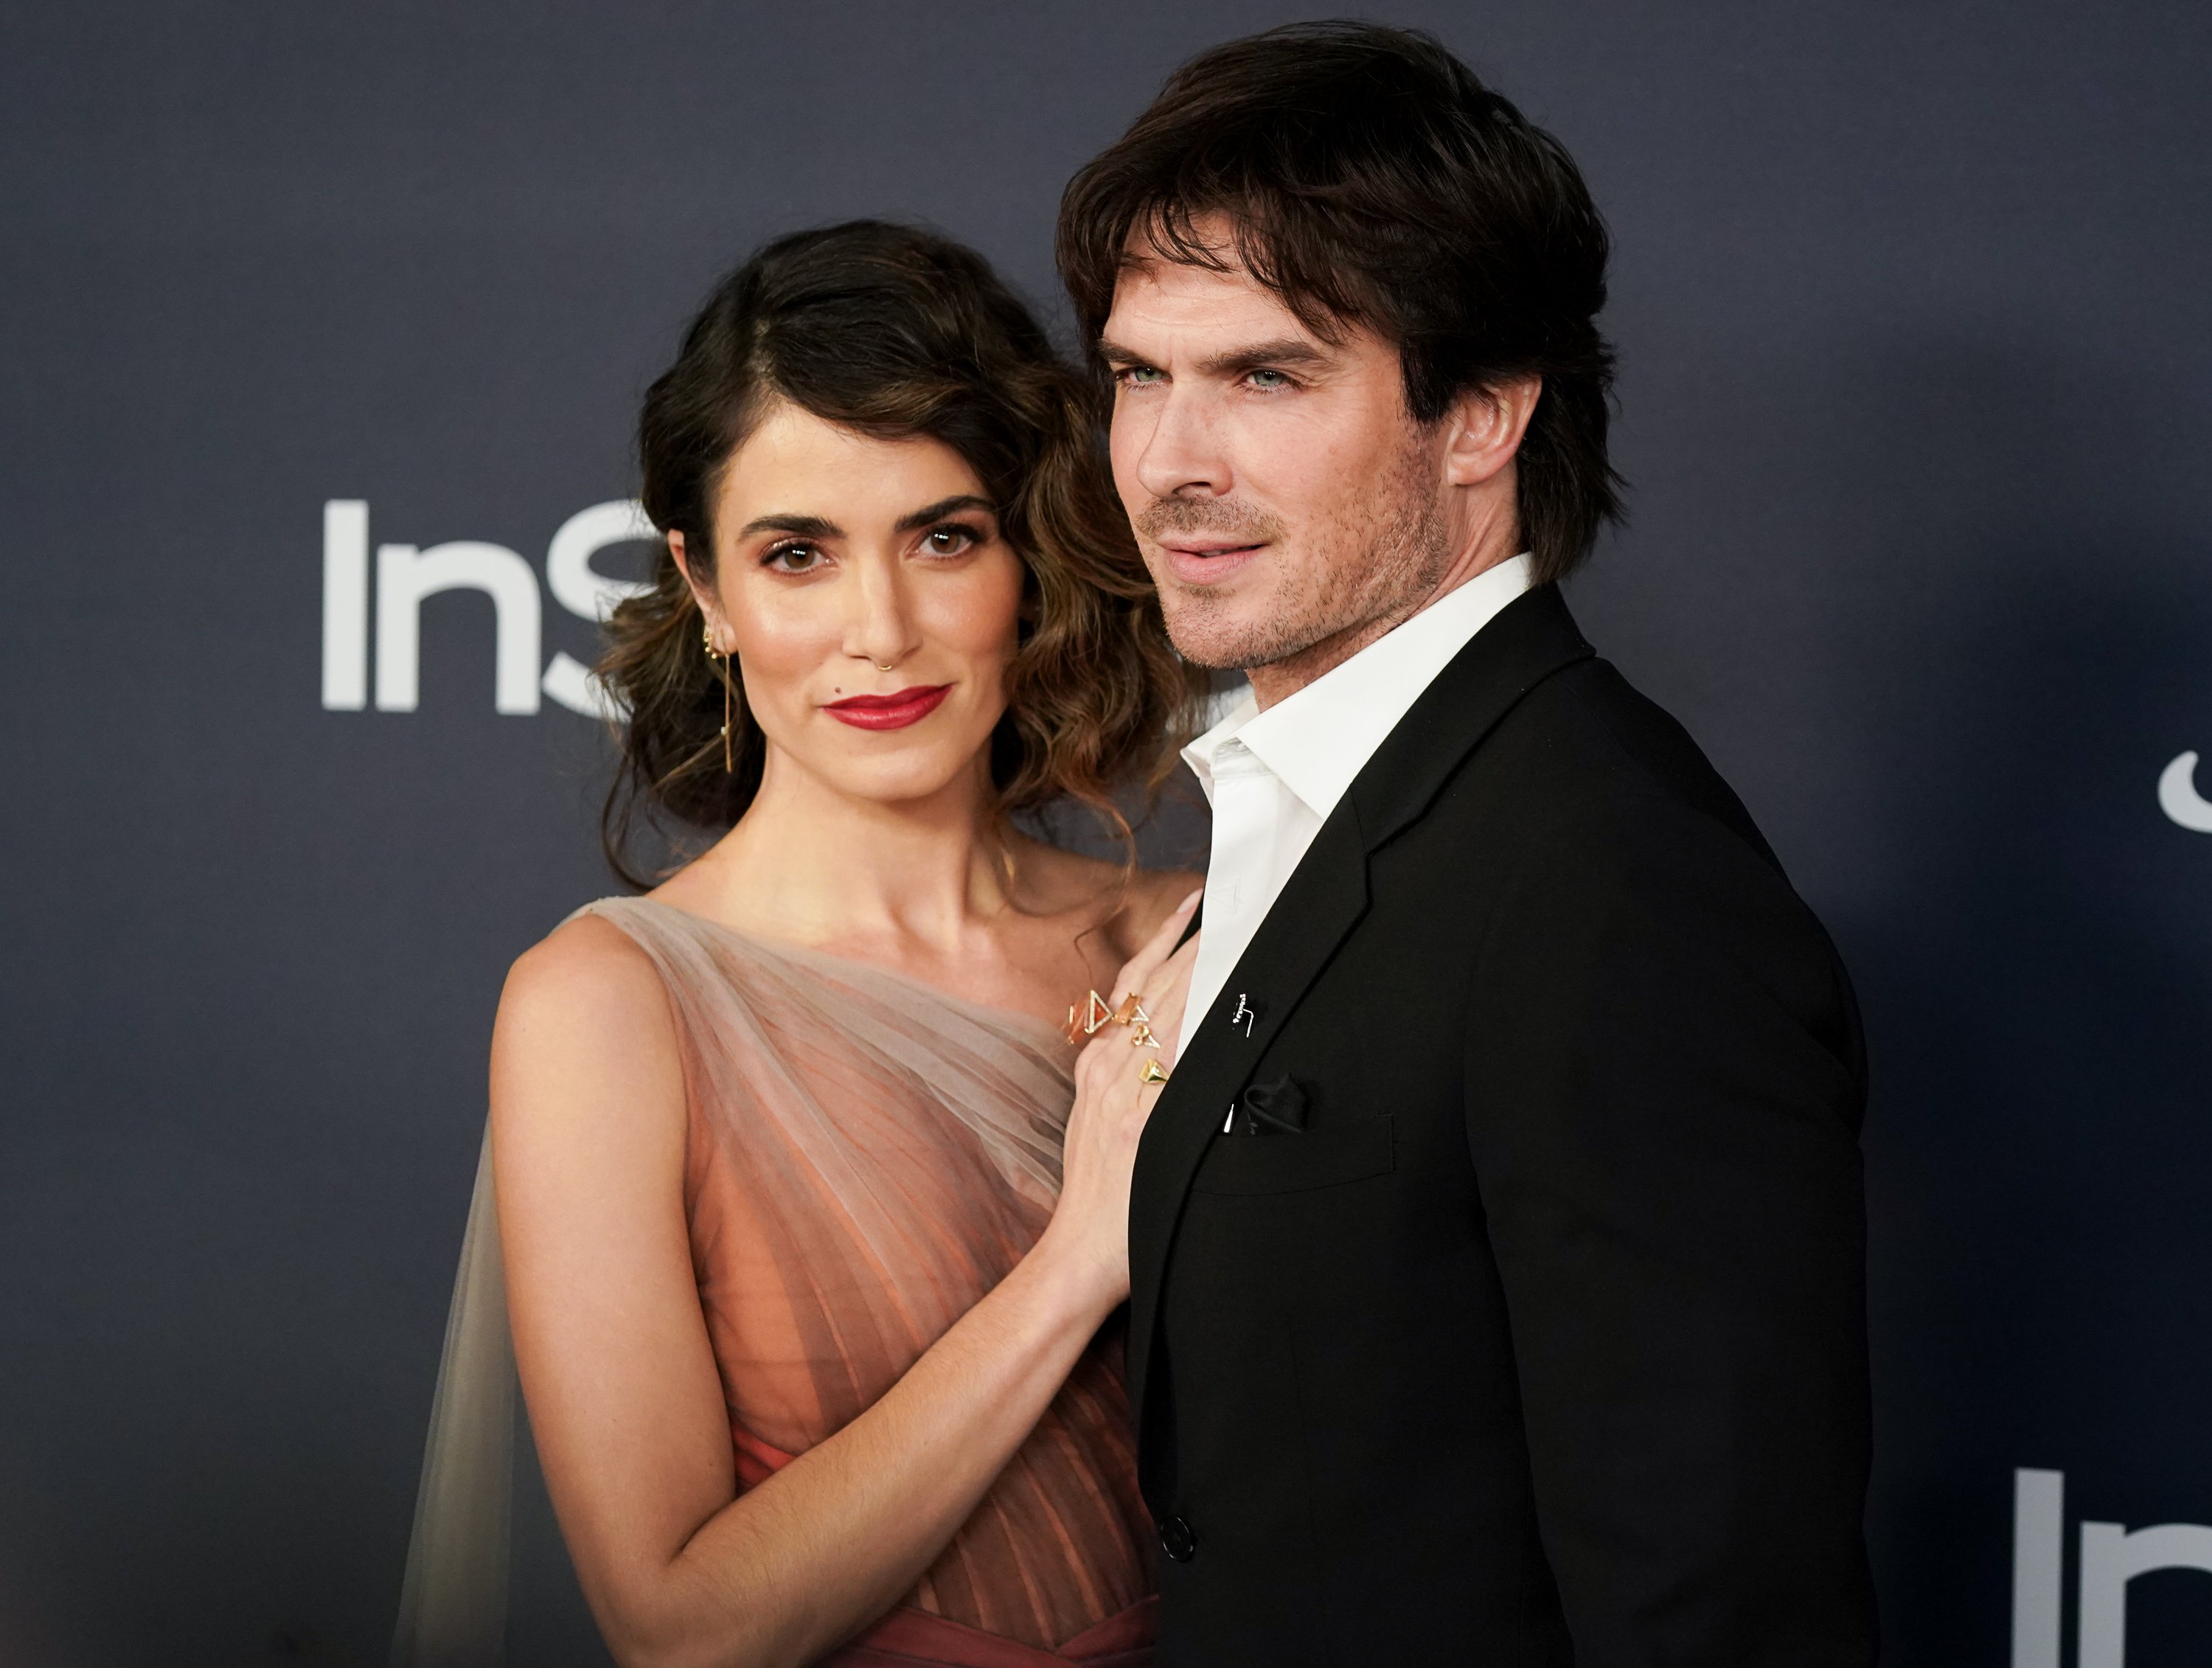 Nikki Reed and Ian Somerhalder attend the 21st Annual Warner Bros. And InStyle Golden Globe After Party at The Beverly Hilton Hotel in Beverly Hills, California on January 05, 2020 | Source: Getty Images